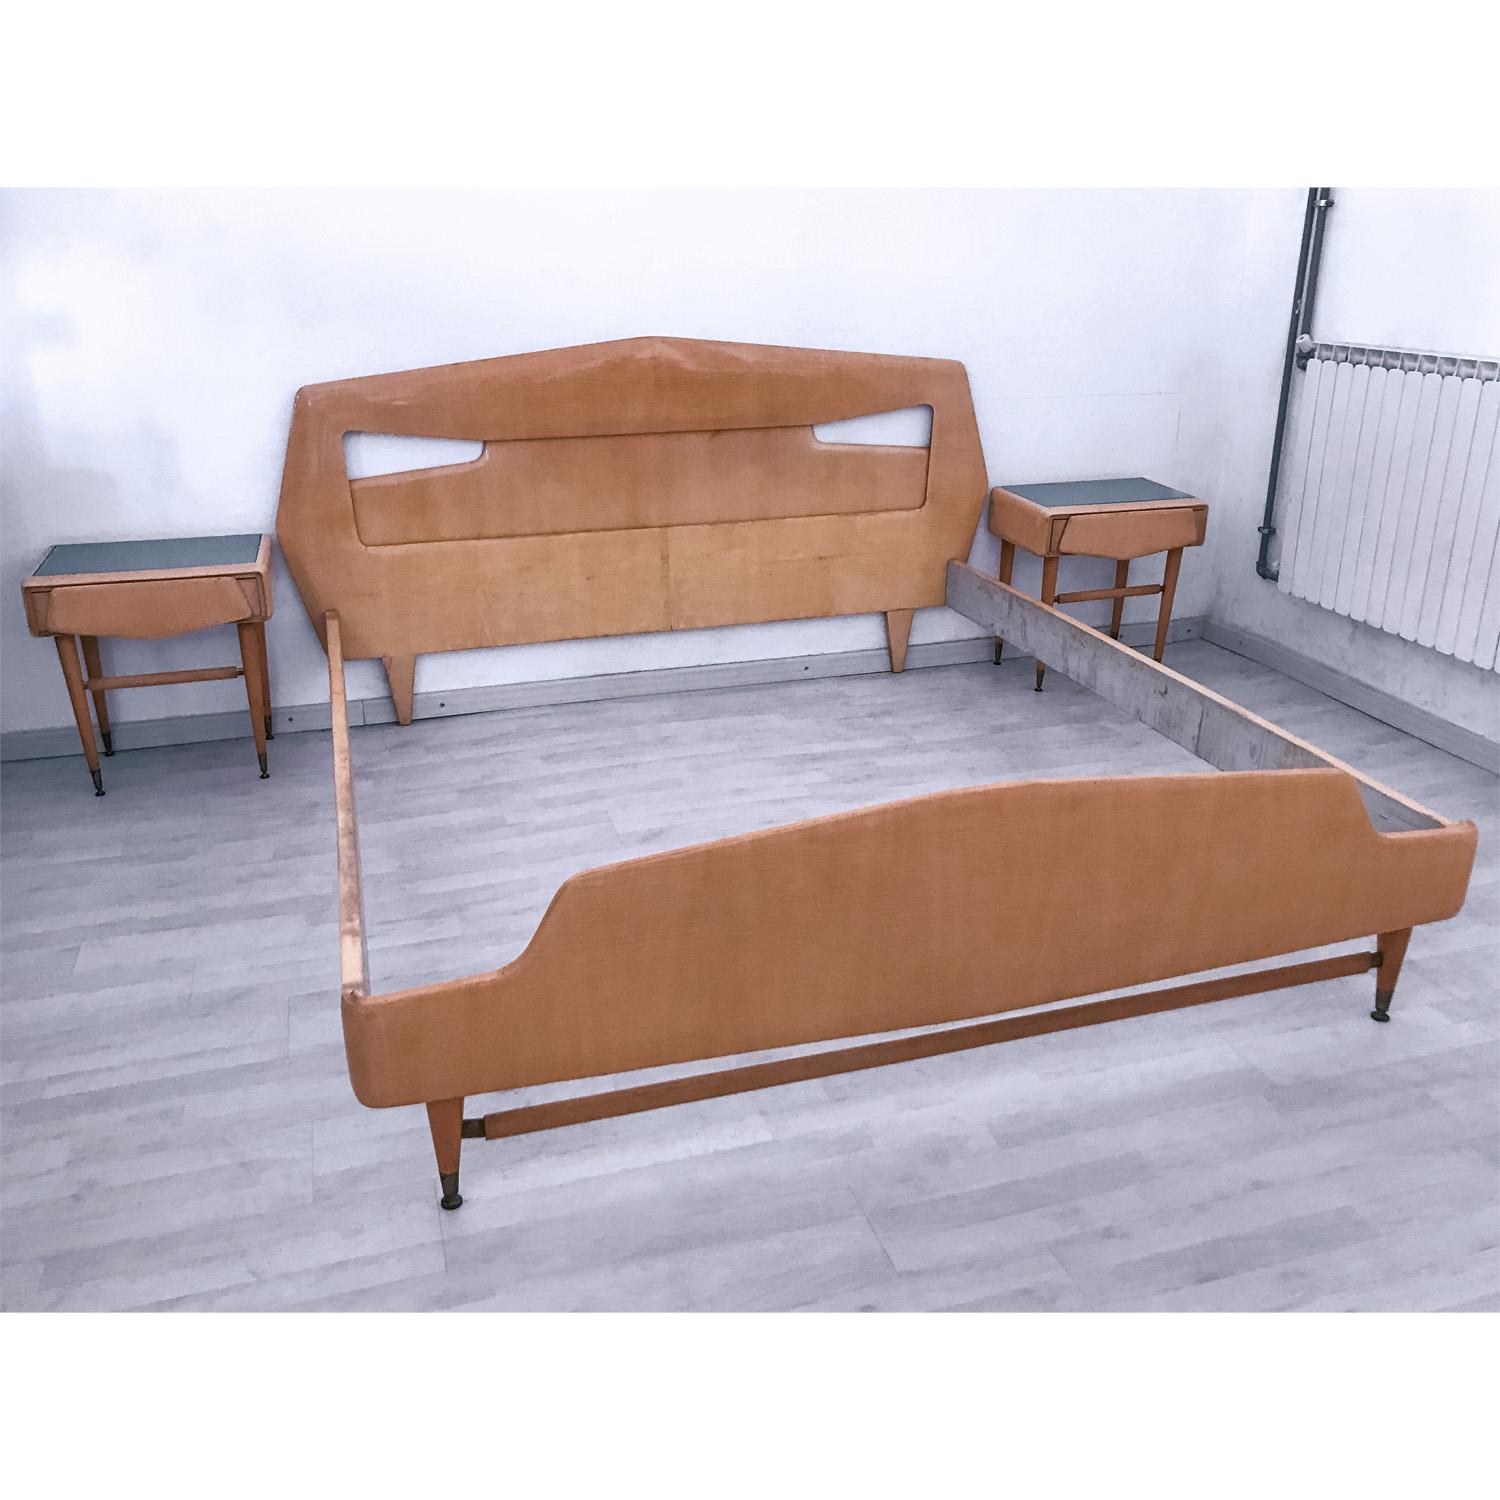 For your consideration an elegant bedroom suite characterized by a catchy sculptural design attributable to Silvio Cavatorta in 1950s, composed by:
- Double bed frame with two bedside tables
- Dresser with mirror
- Vanity dresser with